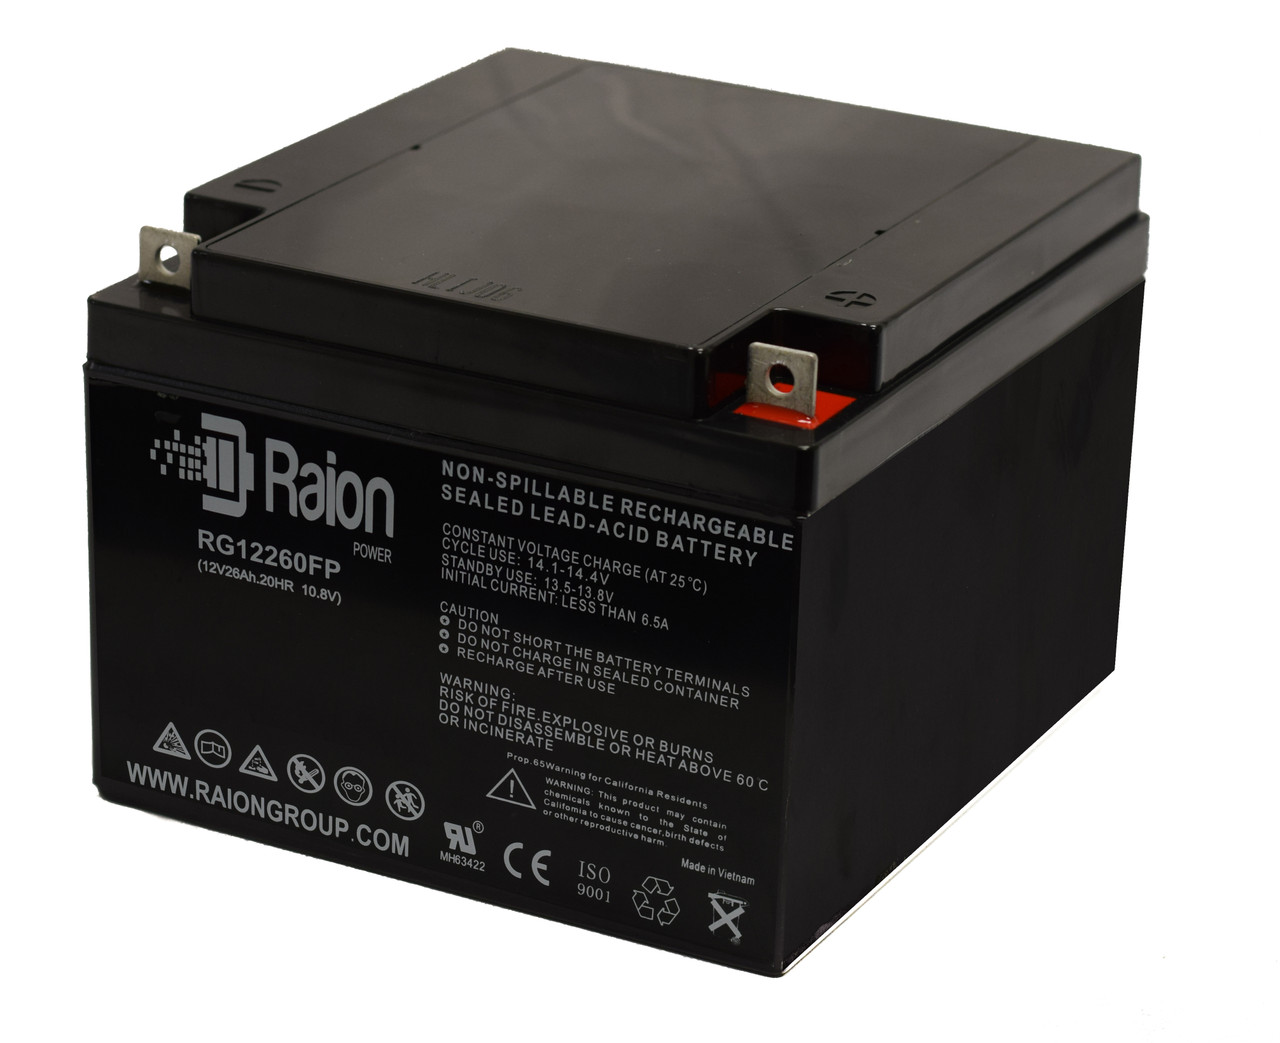 Raion Power Replacement 12V 26Ah Battery for Weida HX12-24 - 1 Pack